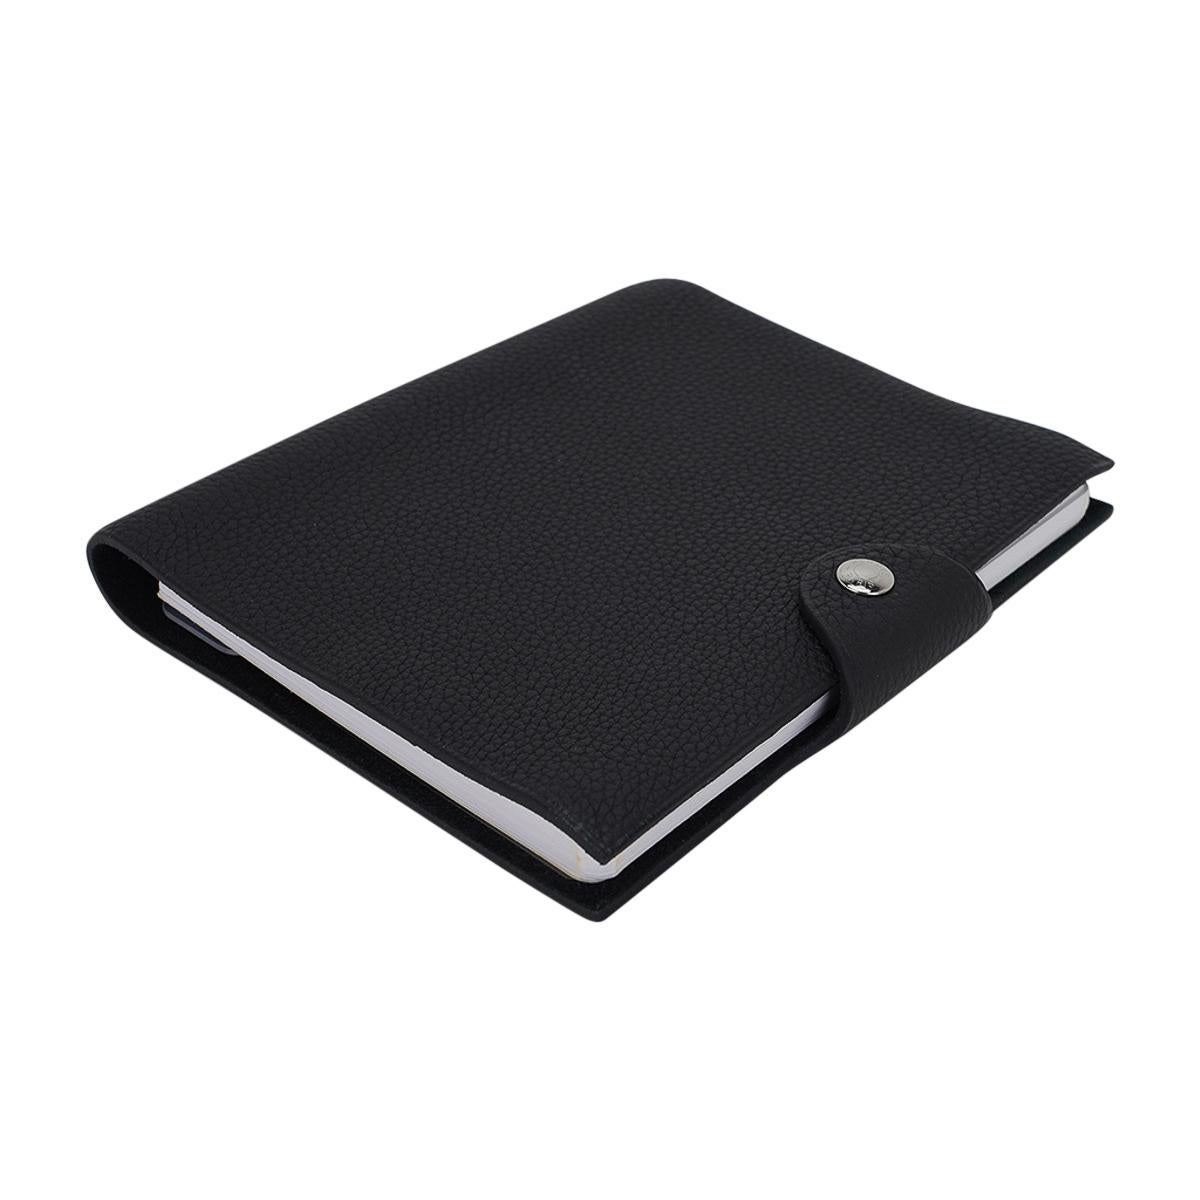 Mightychic offers an Hermes Ulysse PM model notebook cover features Black Togo leather.
Palladium Clou de Selle  snap. 
Comes with a new Ulysse notebook refill.   
New or Store Fresh Condition.
final sale

AGENDA MEASURES:
LENGTH  6.3